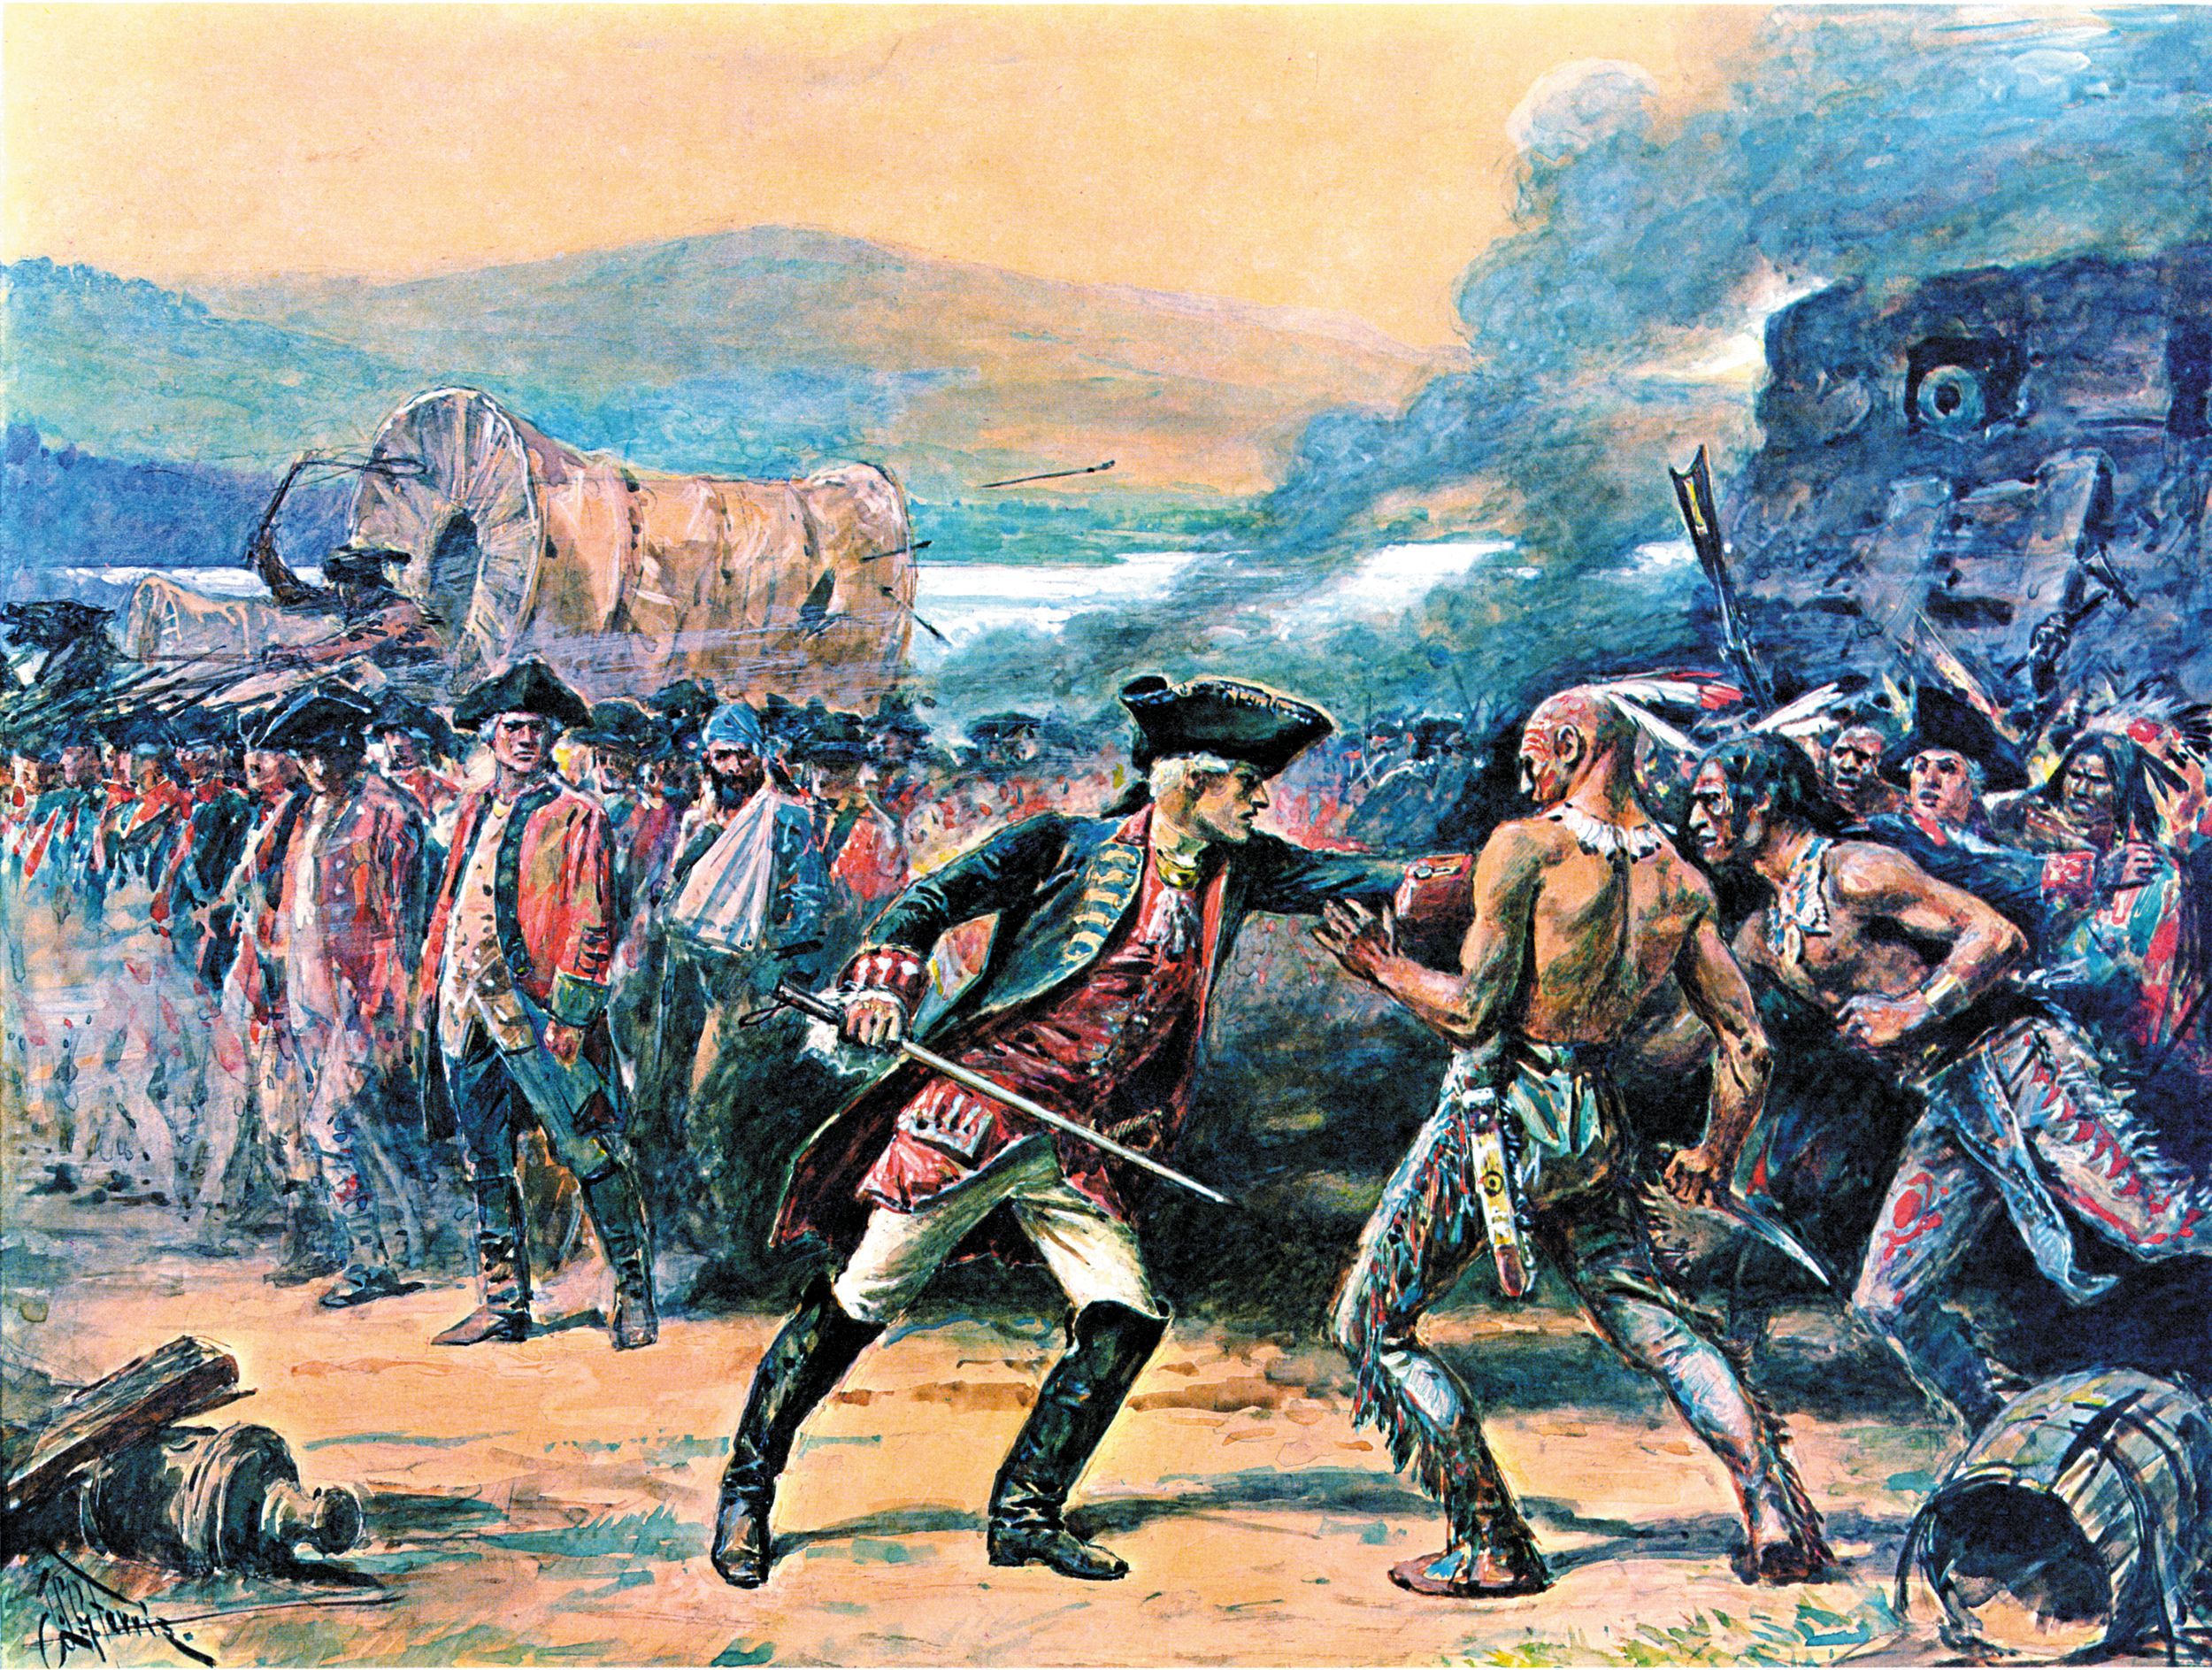 French officers tried but could not hold back their restive Indian allies after the British surrendered Ft. William Henry in August 1757.